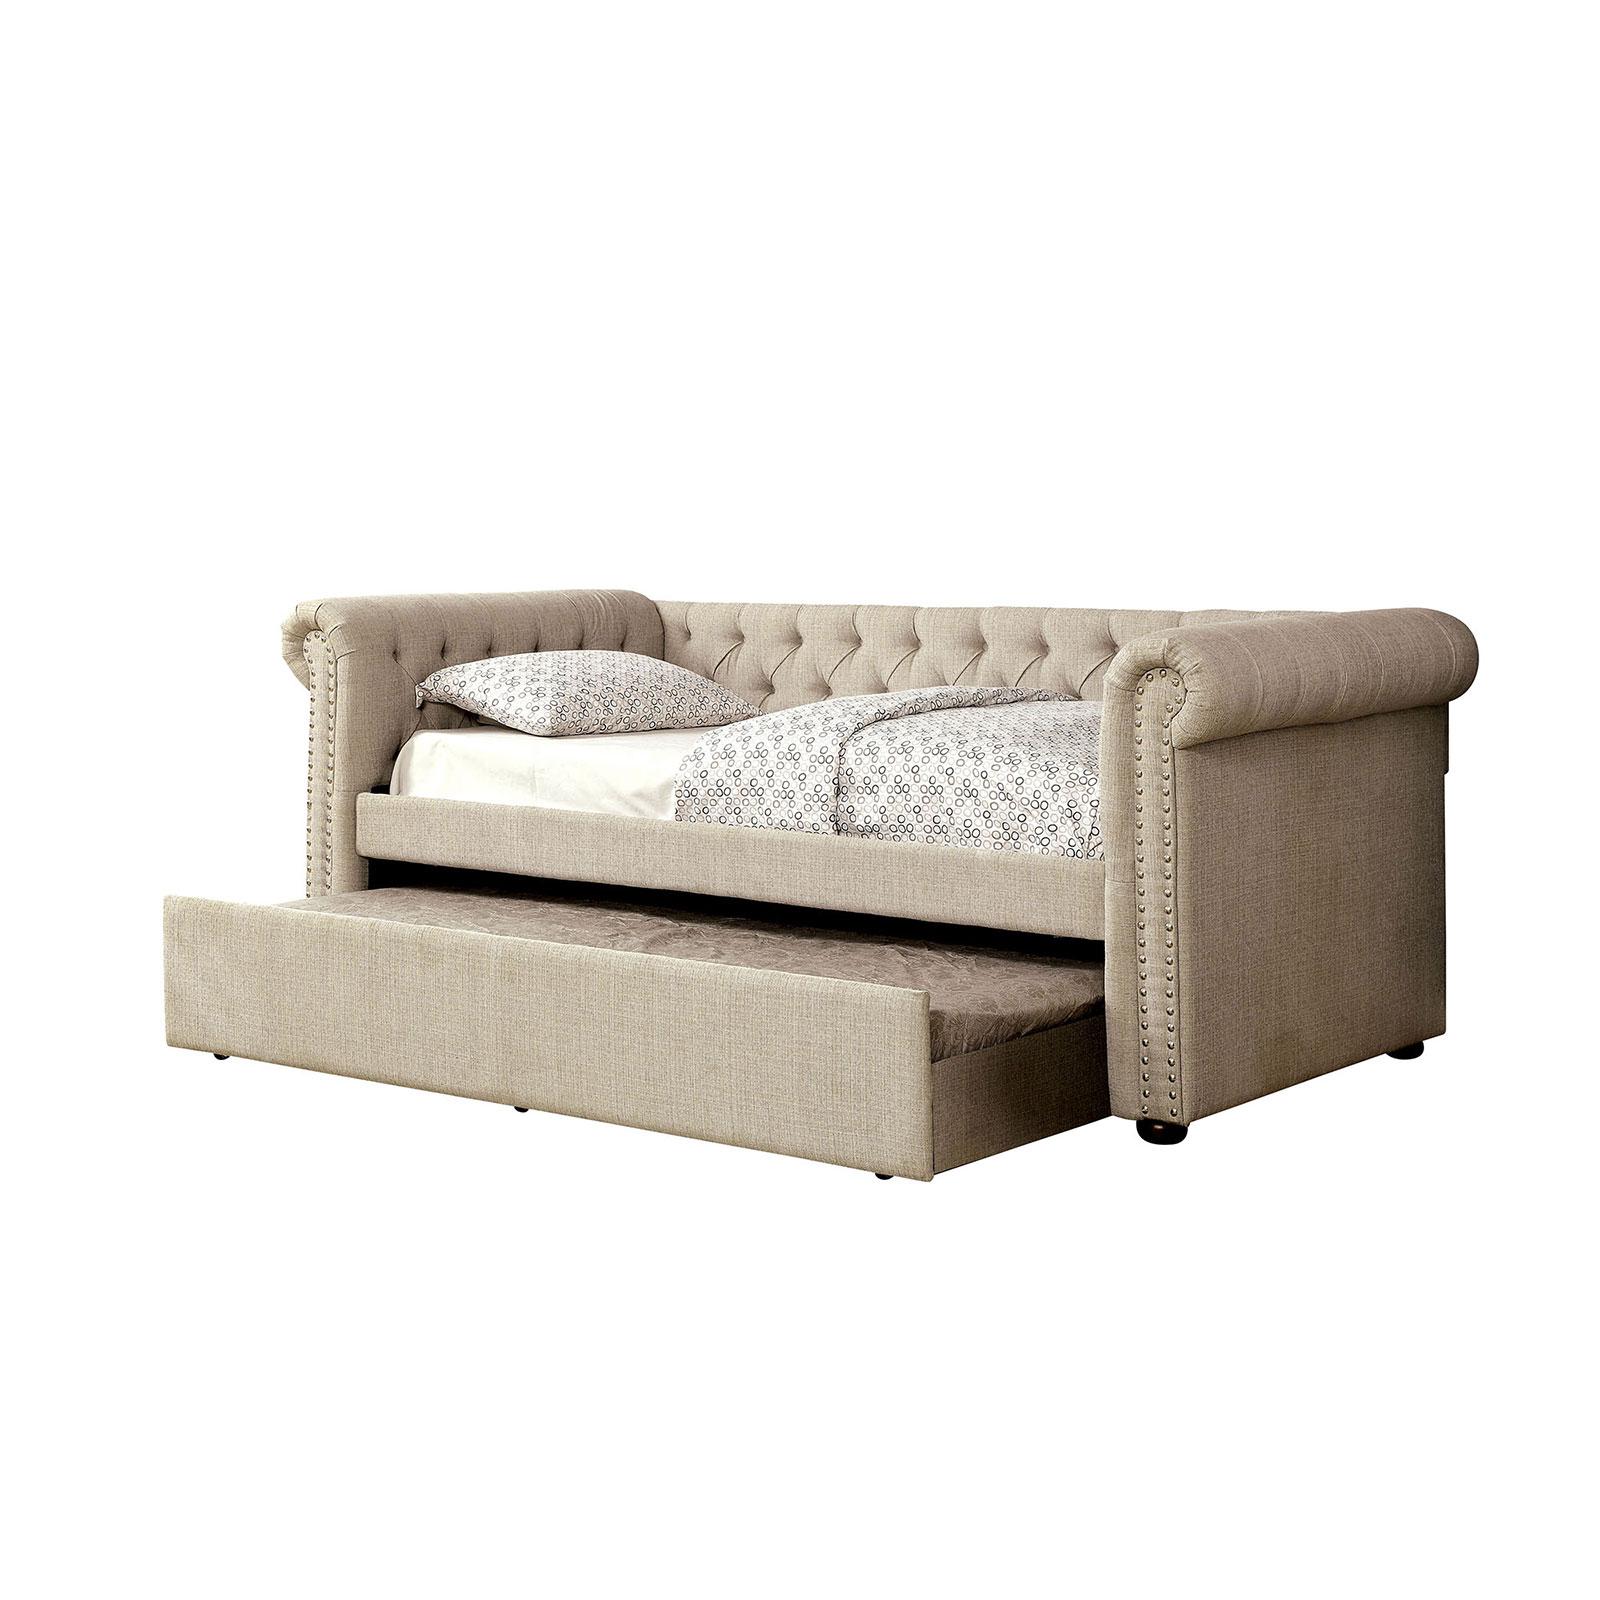 Furniture of America LEANNA CM1027BG-Q-BED Daybed